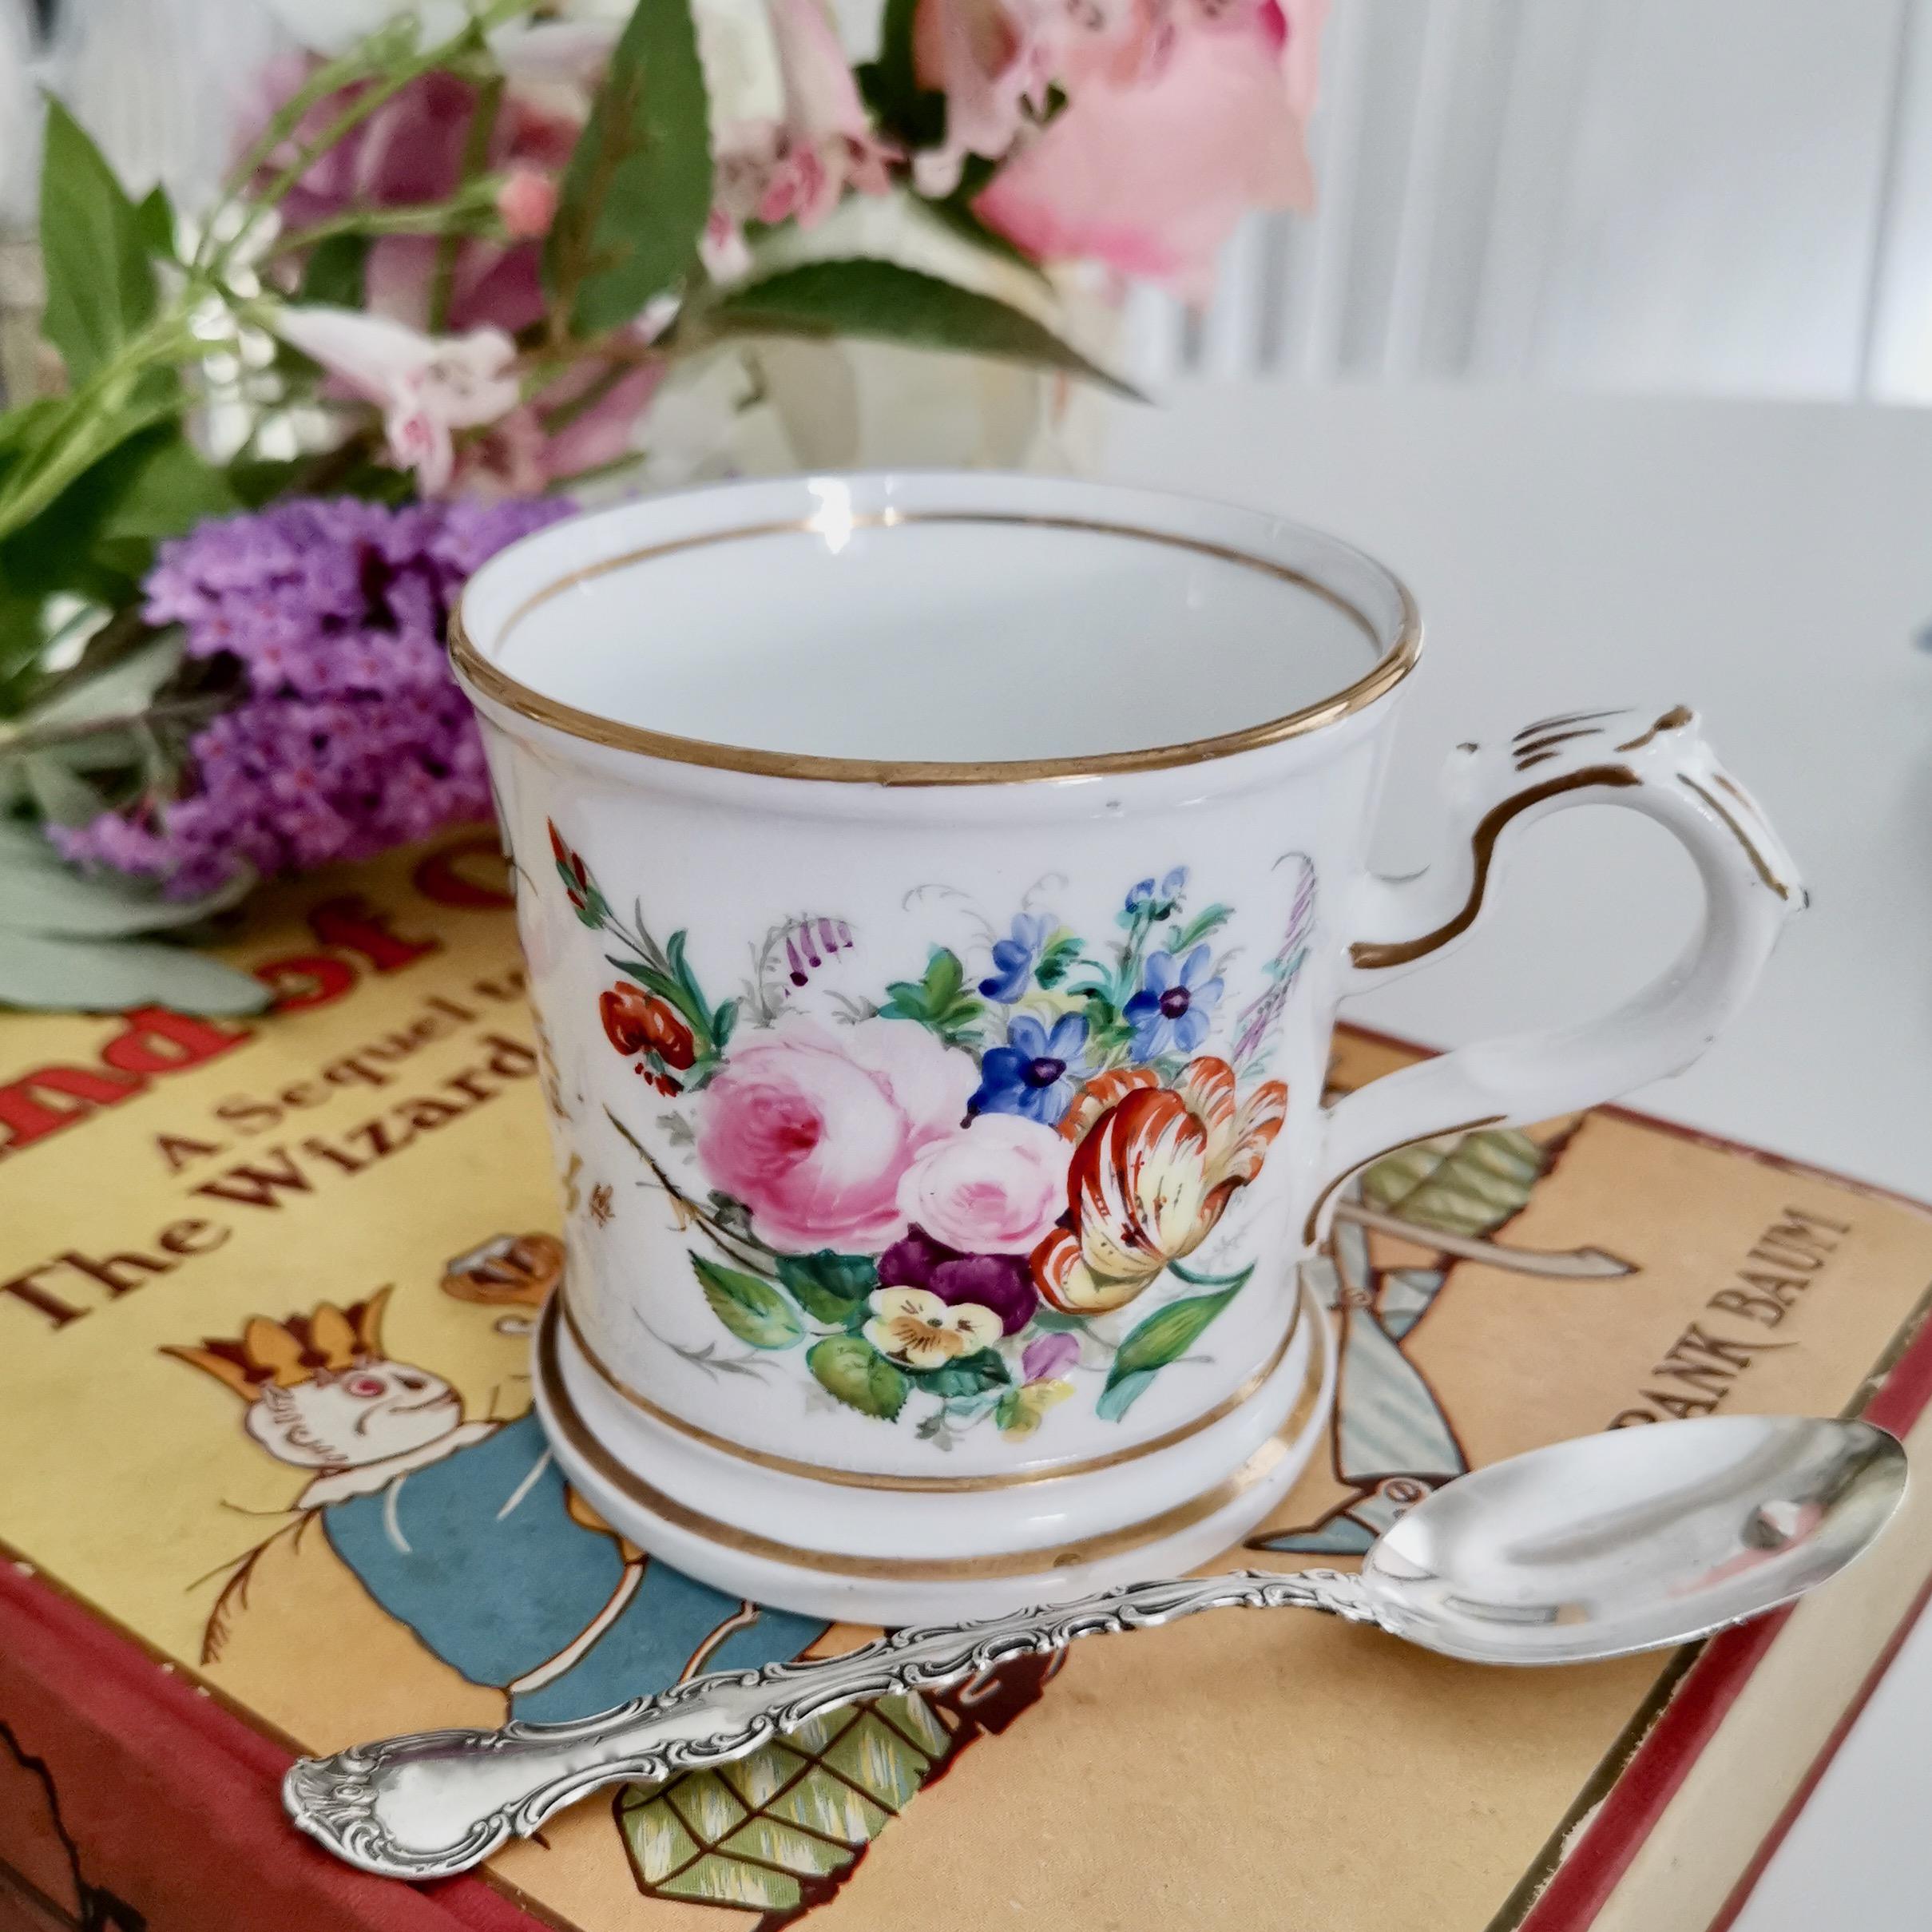 This is a beautiful porcelain christening mug made in Staffordshire in the year 1867, which was the Victorian era. The mug has hand painted flowers on a white ground, and the gilded text 